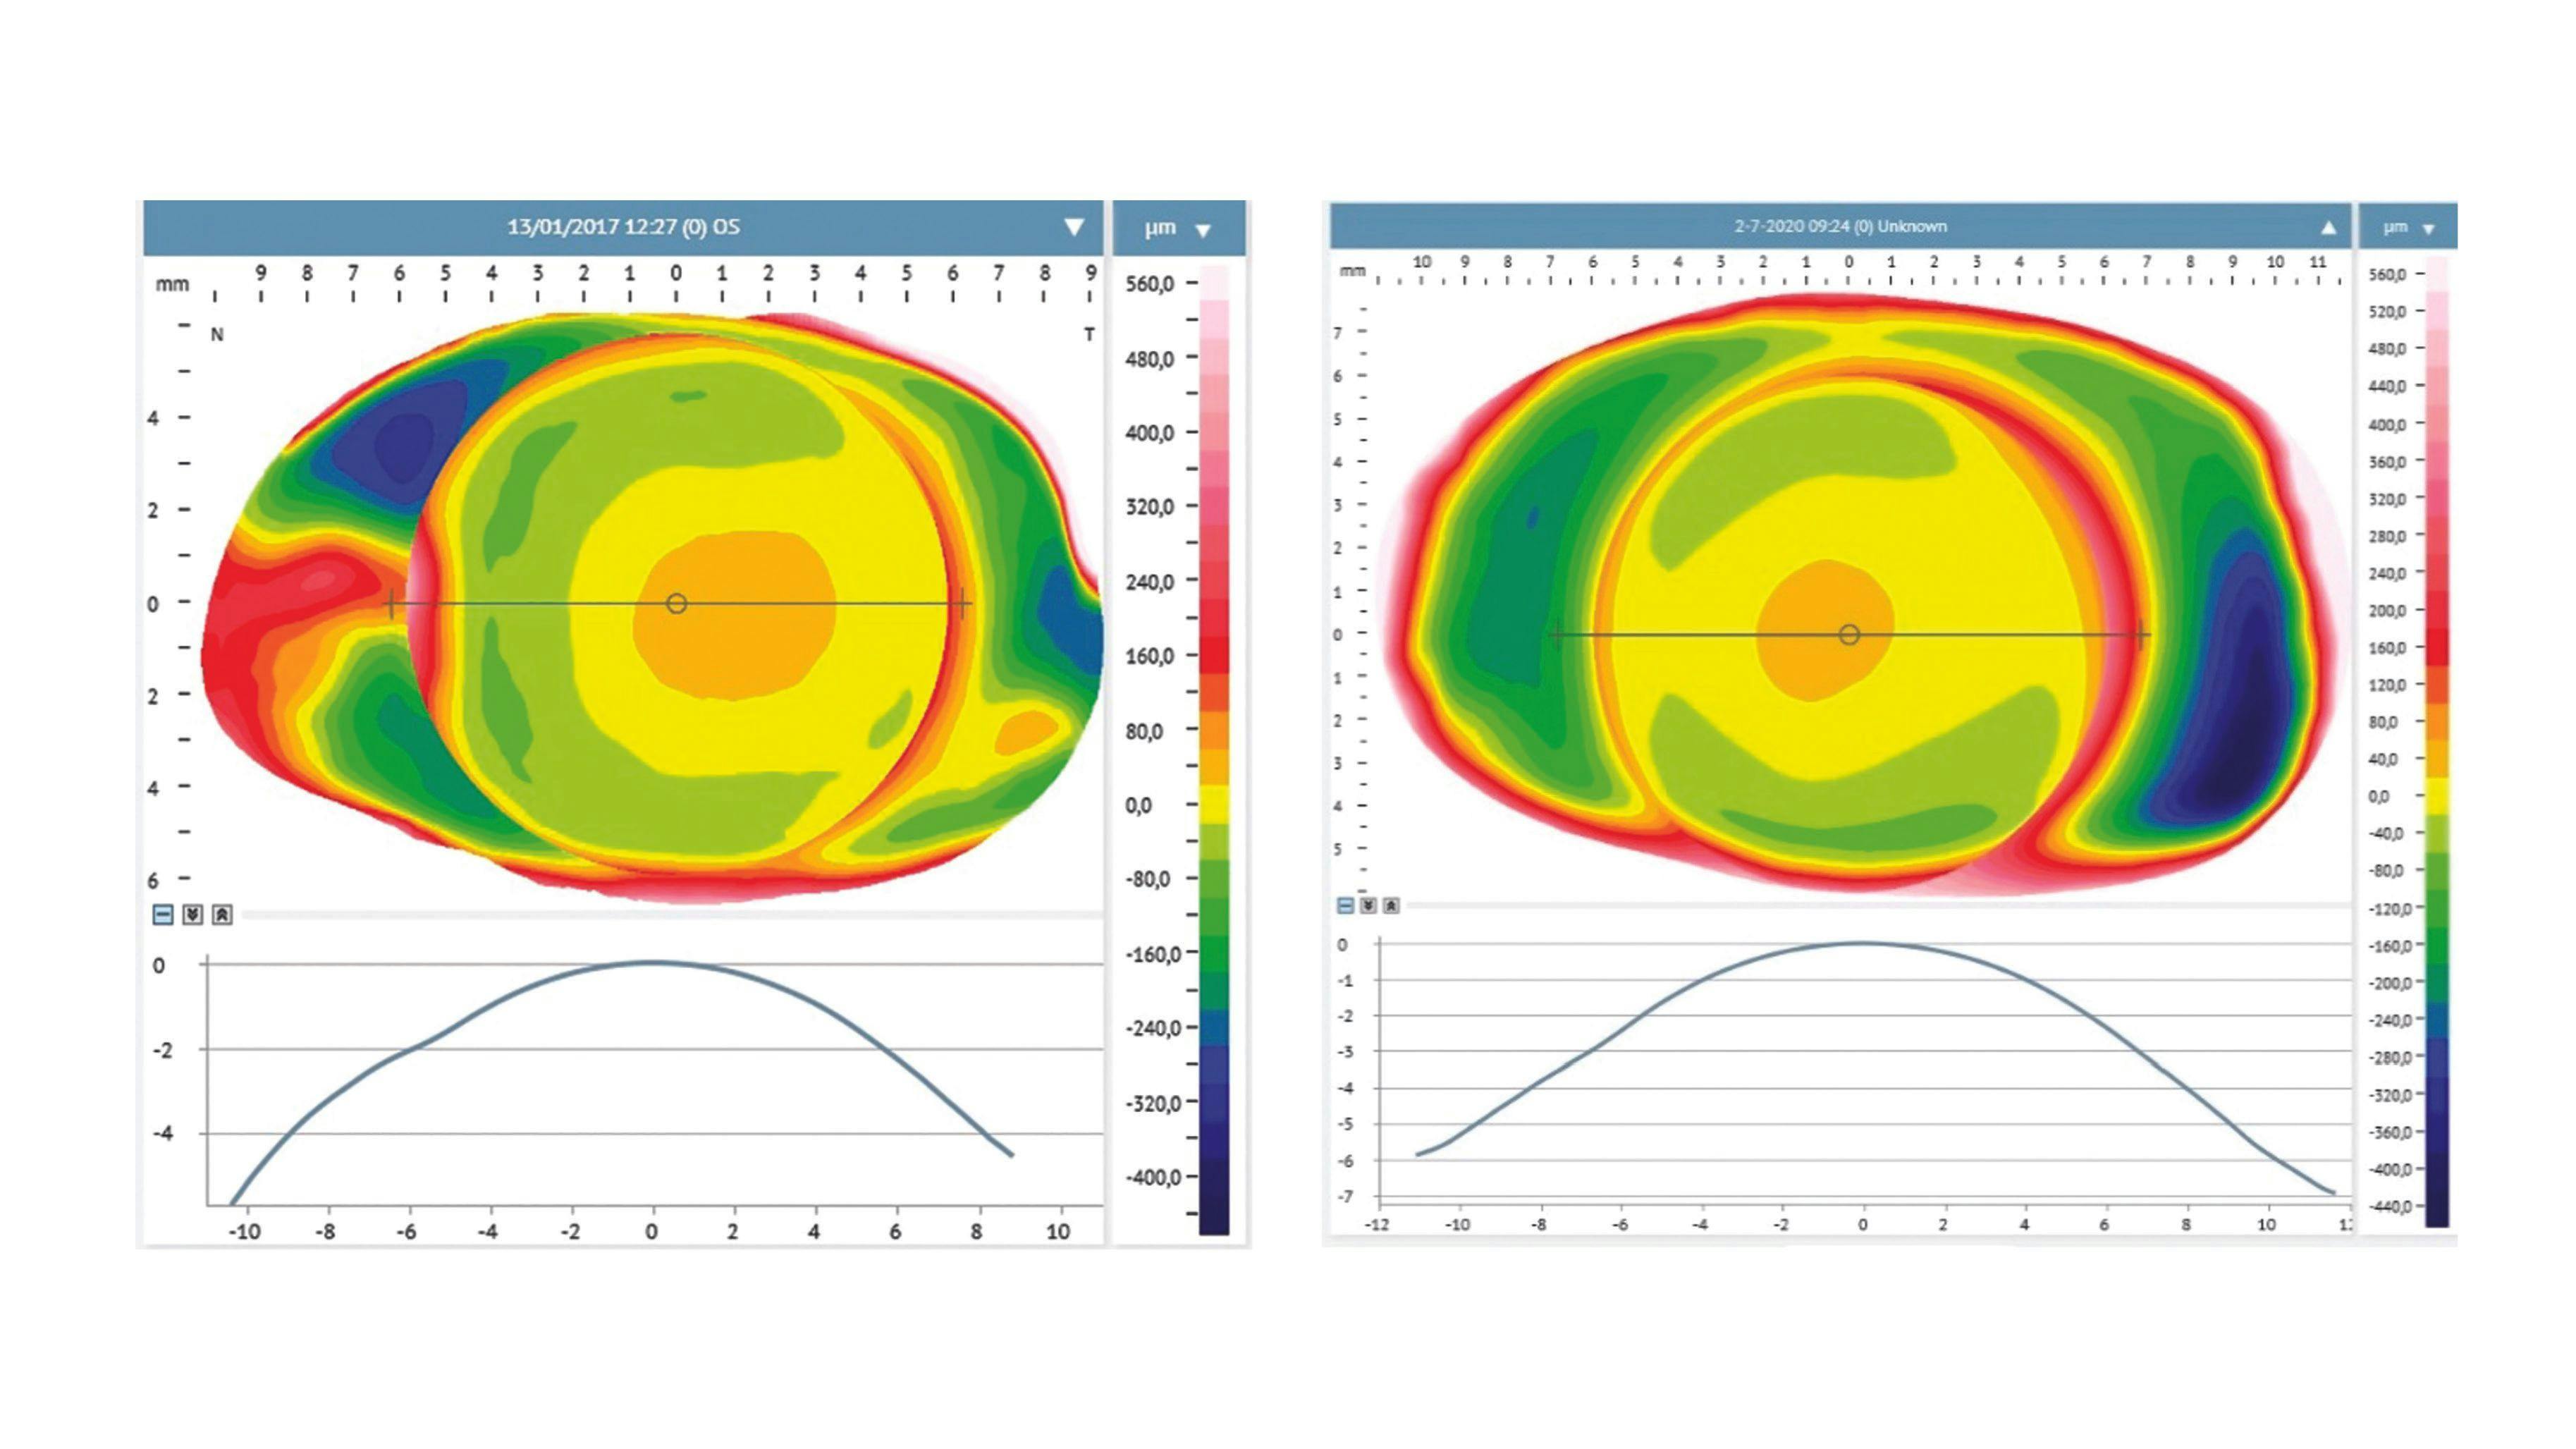 Bi-sphere corneo-scleral topographic map obtained in an emmetropic eye (left) and a myopic eye (right). (Figure courtesy of Dr Laurent Bataille, Dr Ainhoa Molina-Martín and Dr David P. Piñero)